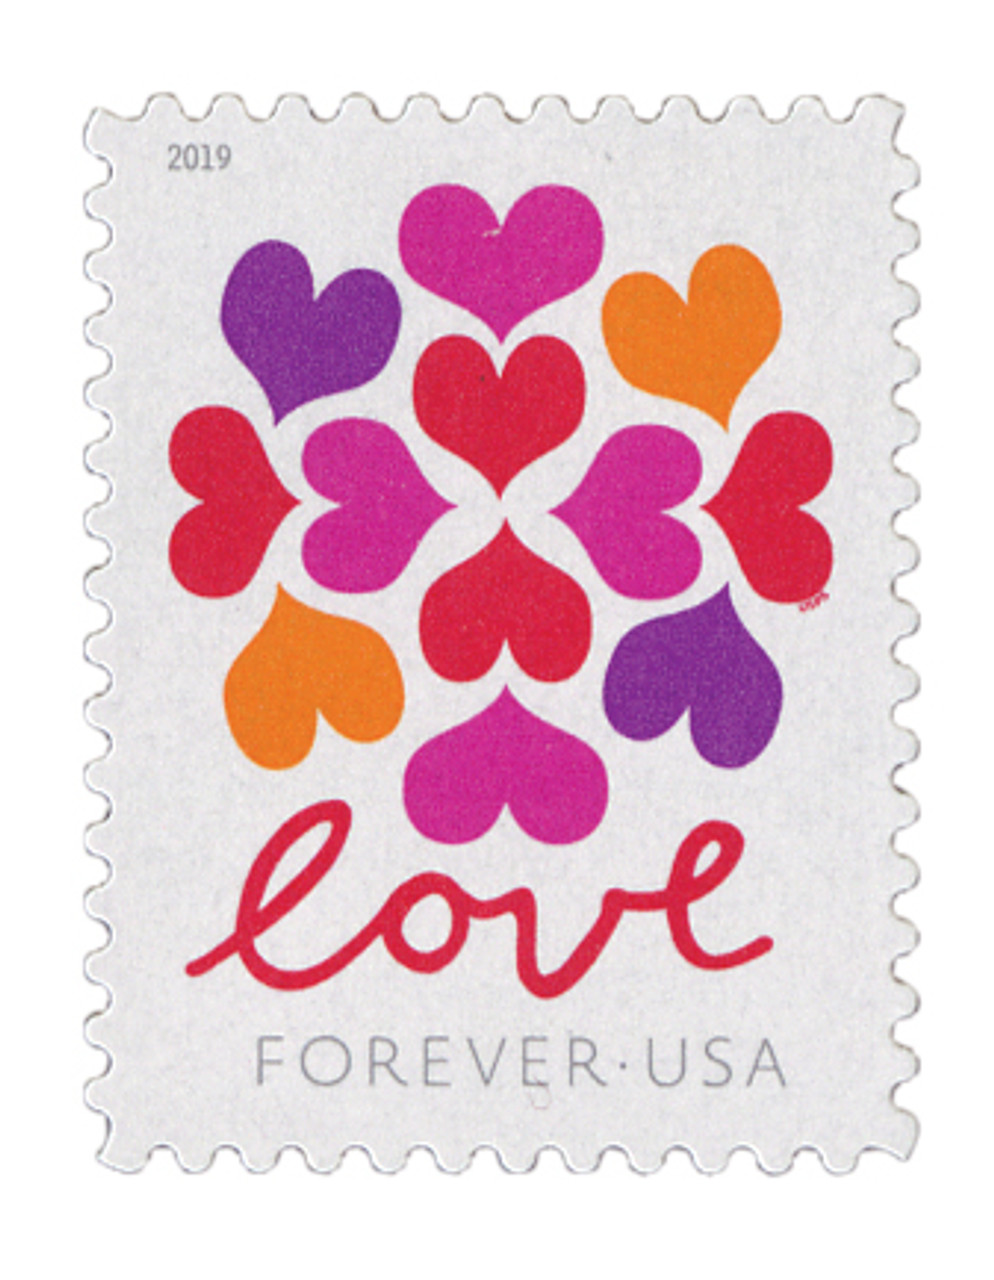 5339 - 2019 First-Class Forever Stamp - Love Series: Heart Blossoms -  Mystic Stamp Company